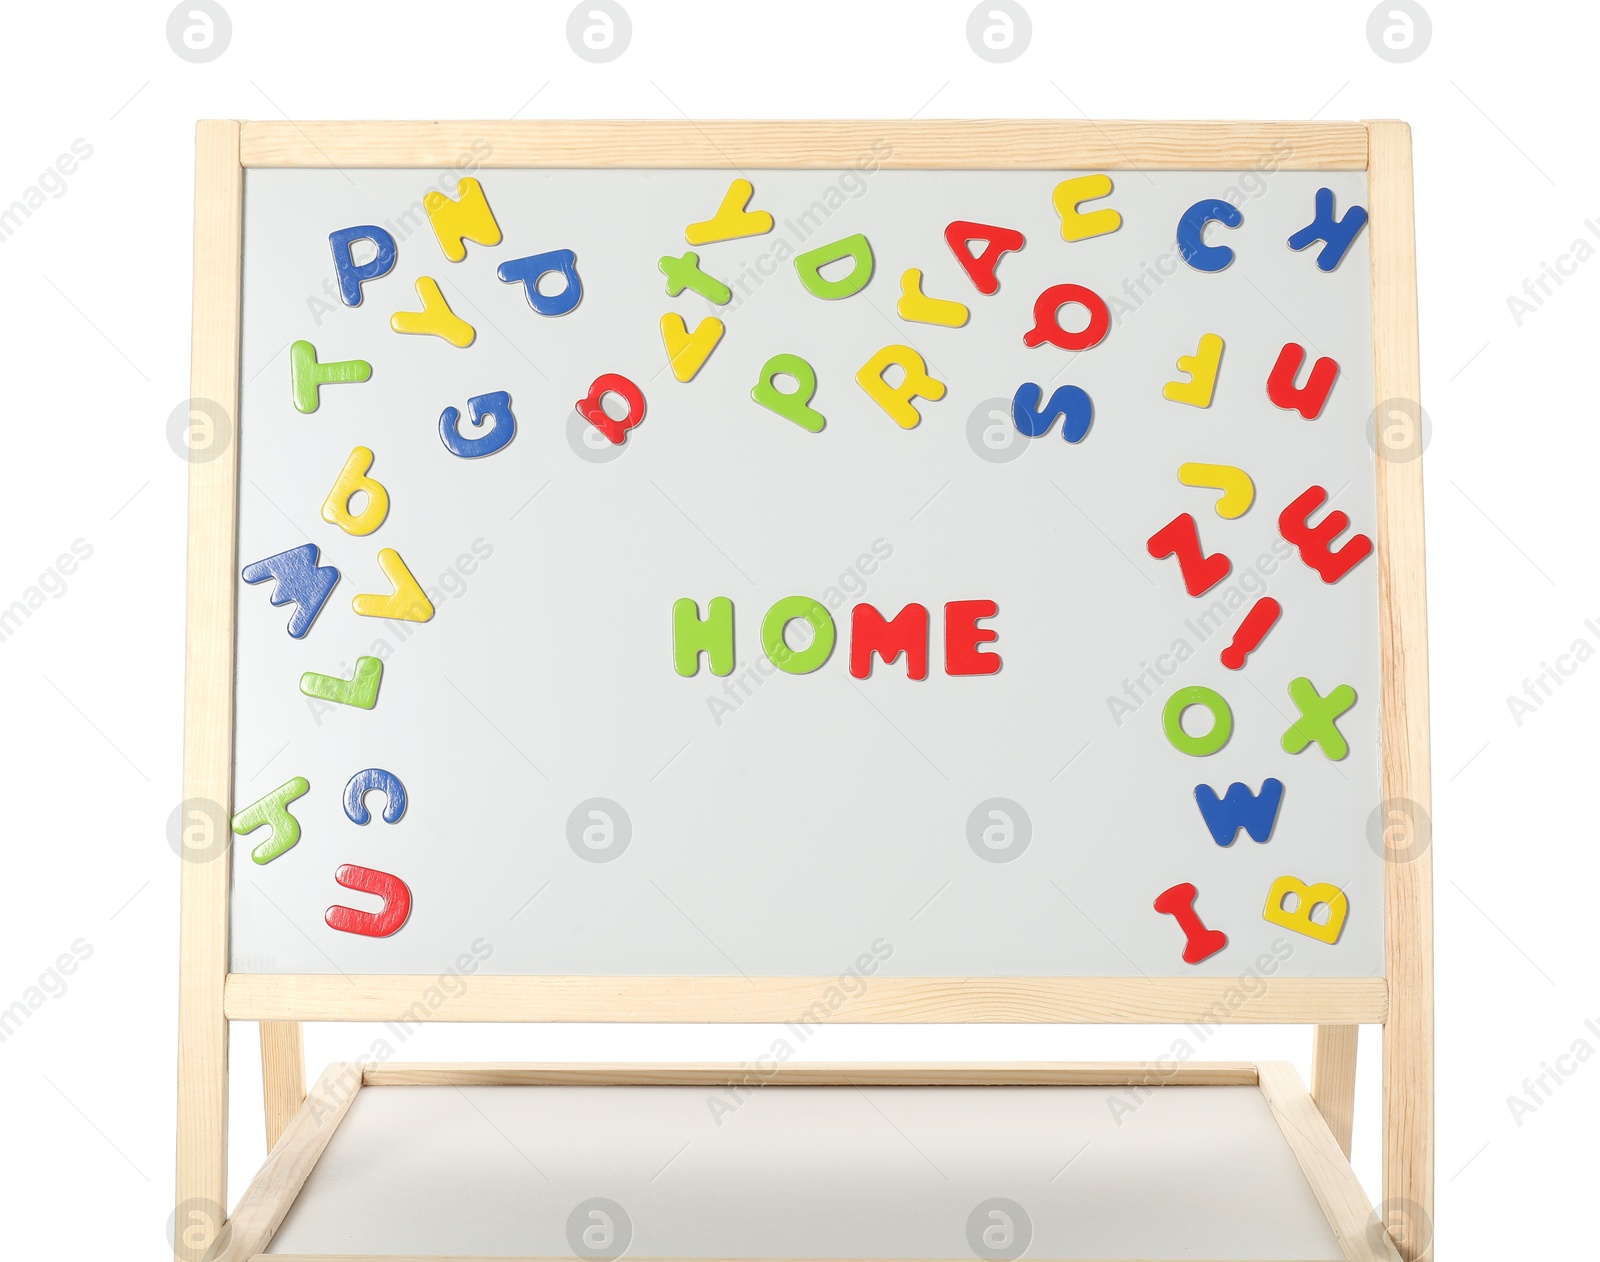 Photo of Word Home made of magnetic letters on board against white background. Learning alphabet